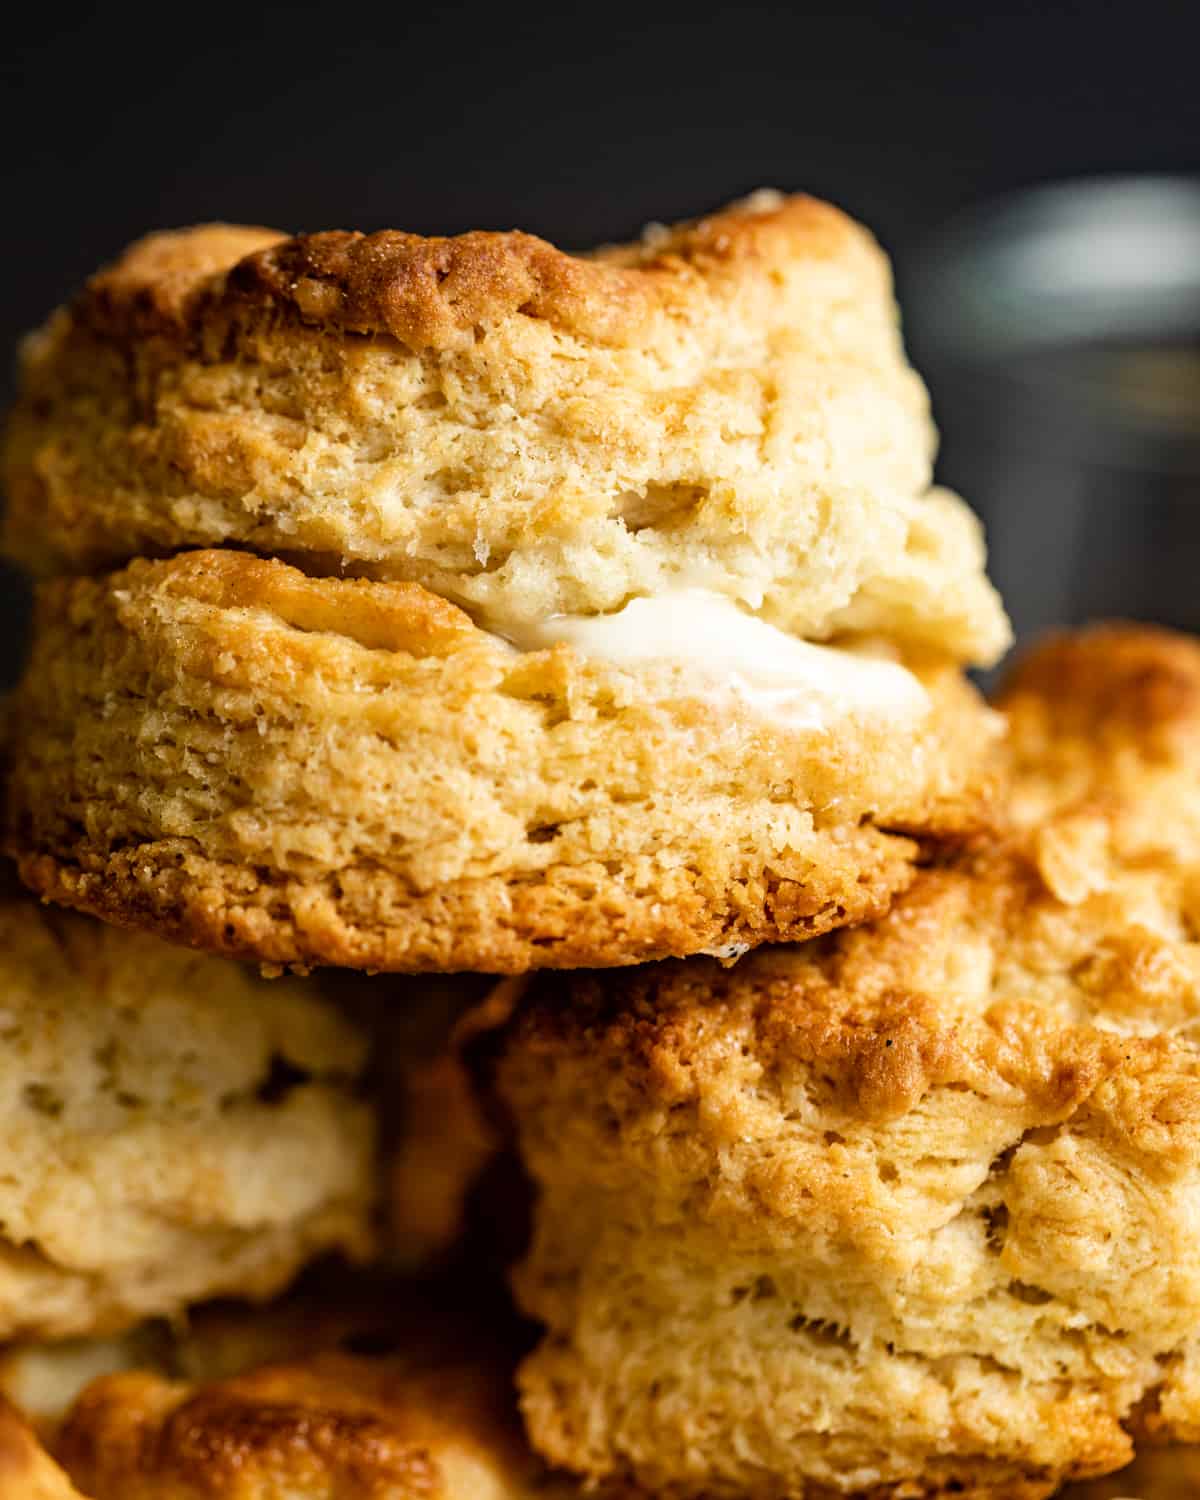 up close photo of biscuits with melted butter in the middle.